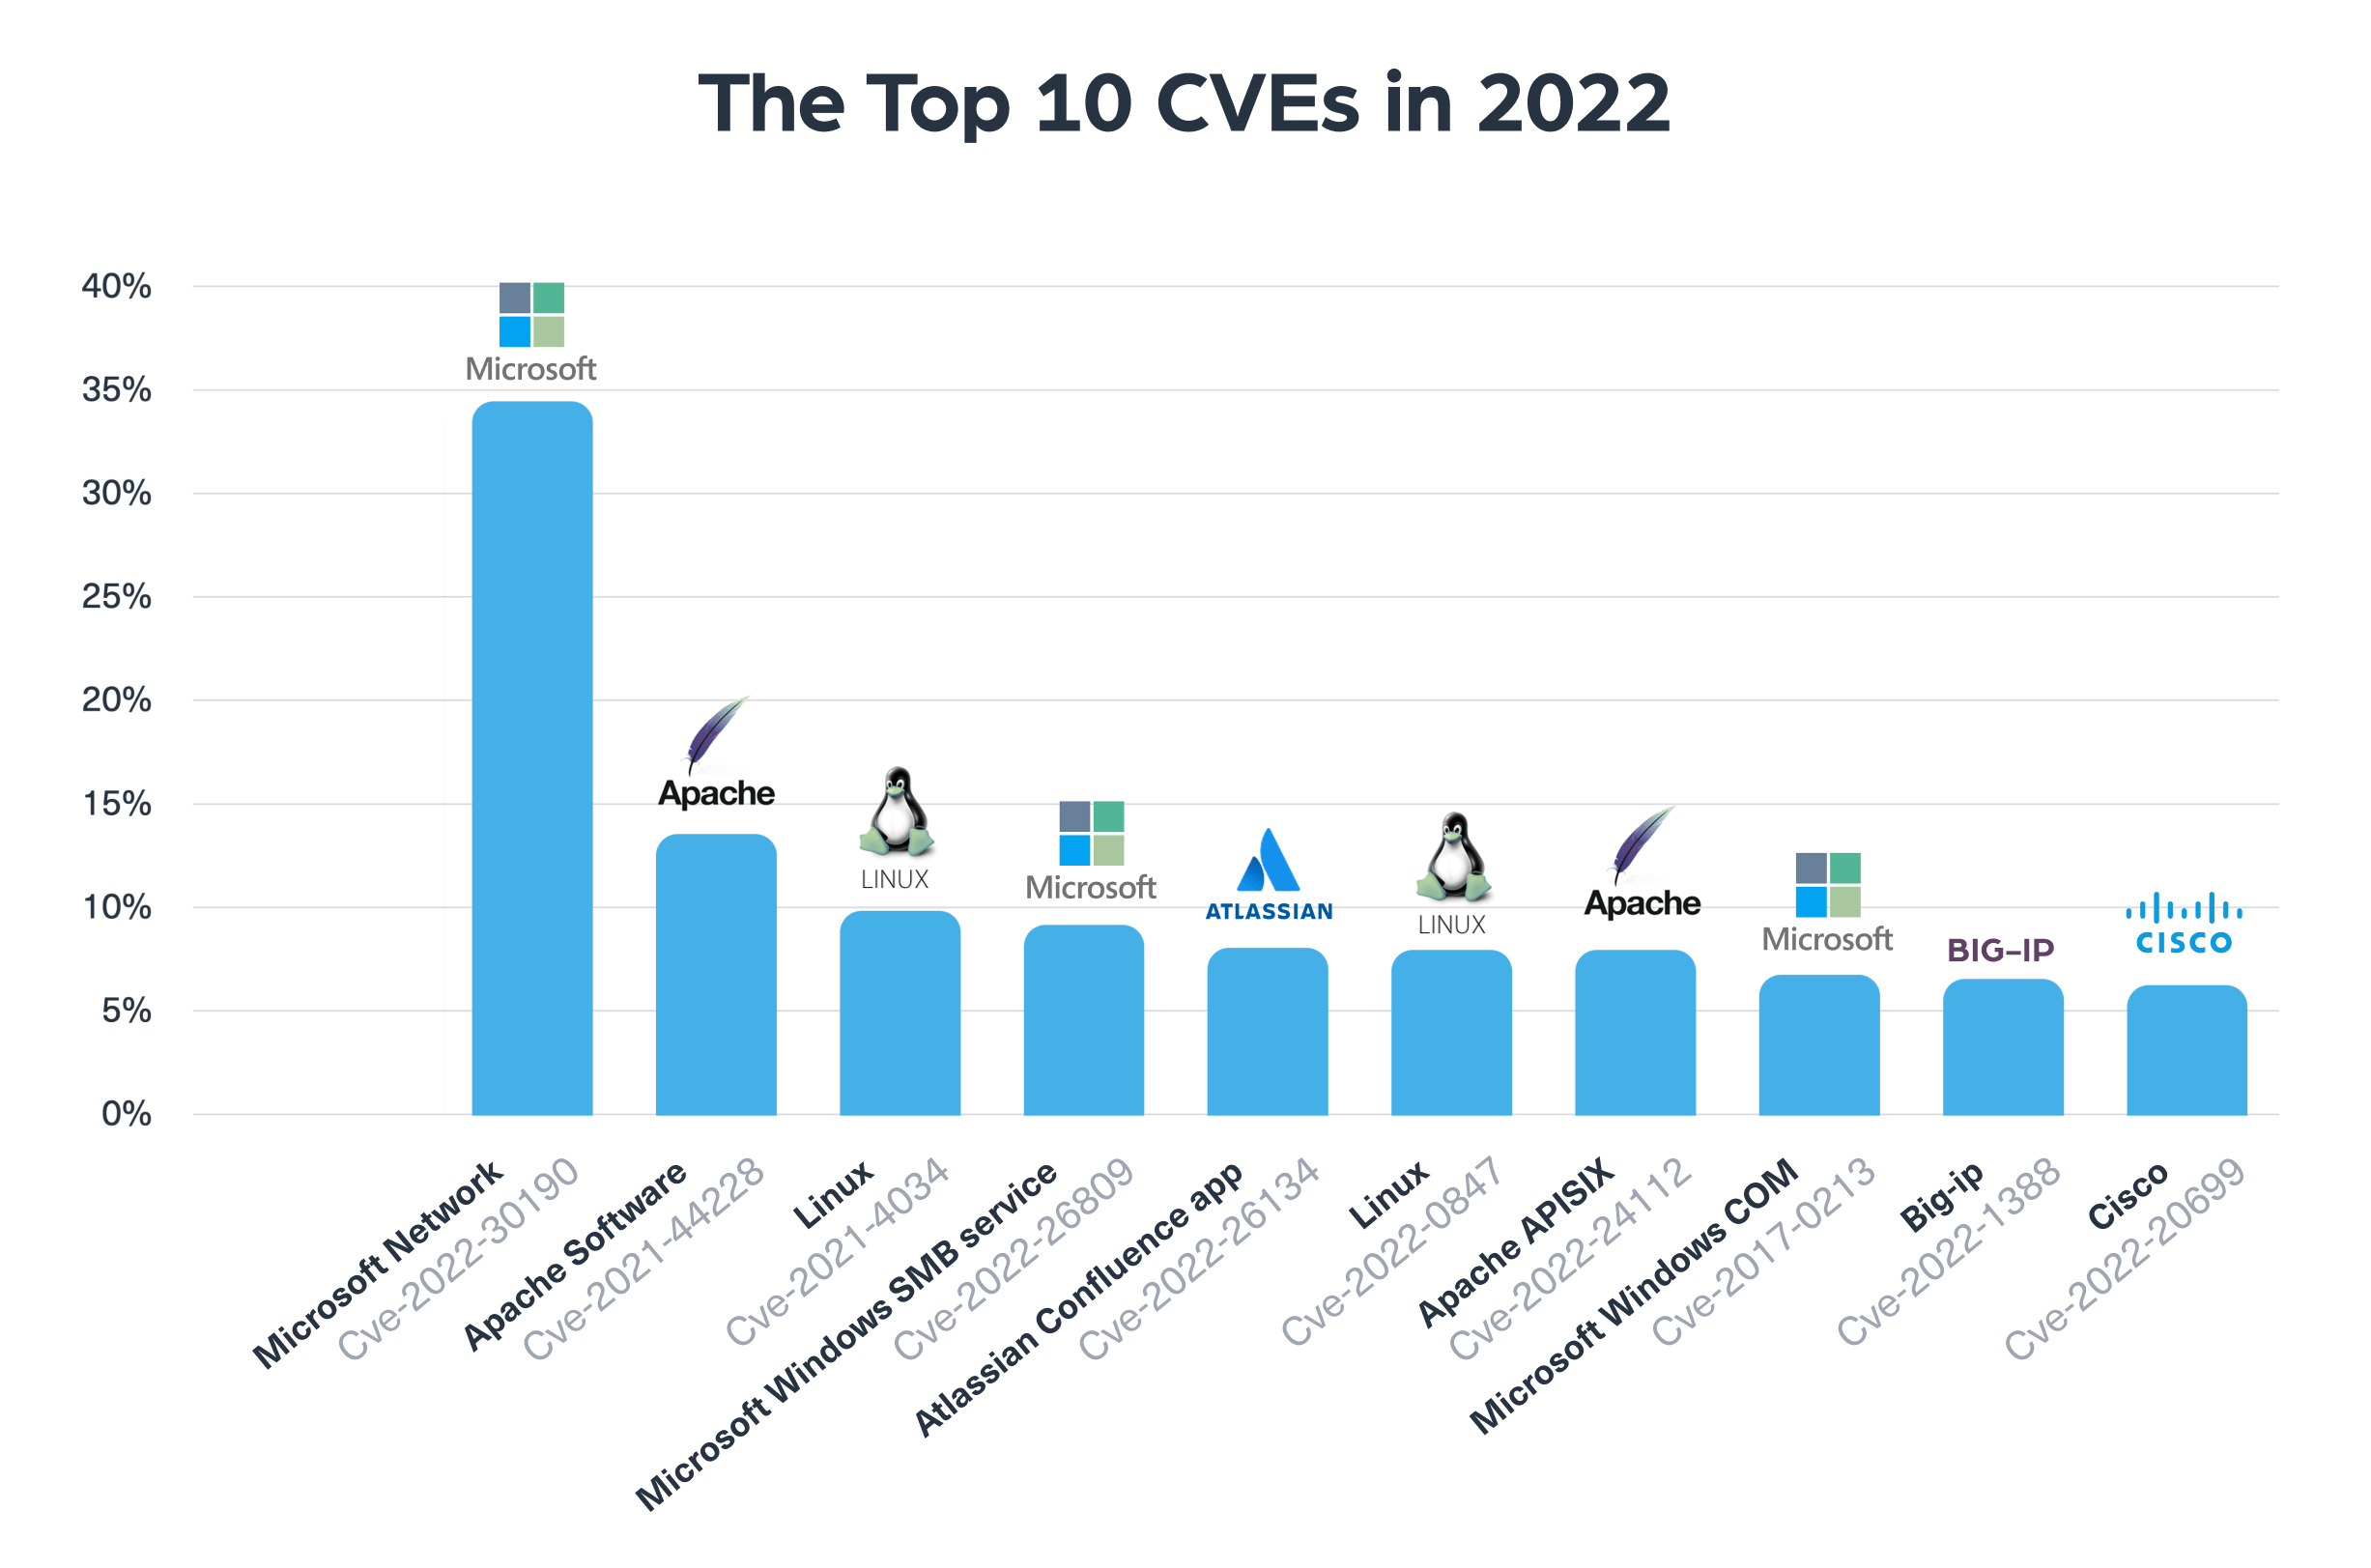 The top 10 CVEs mentioned on the dark web in 2022